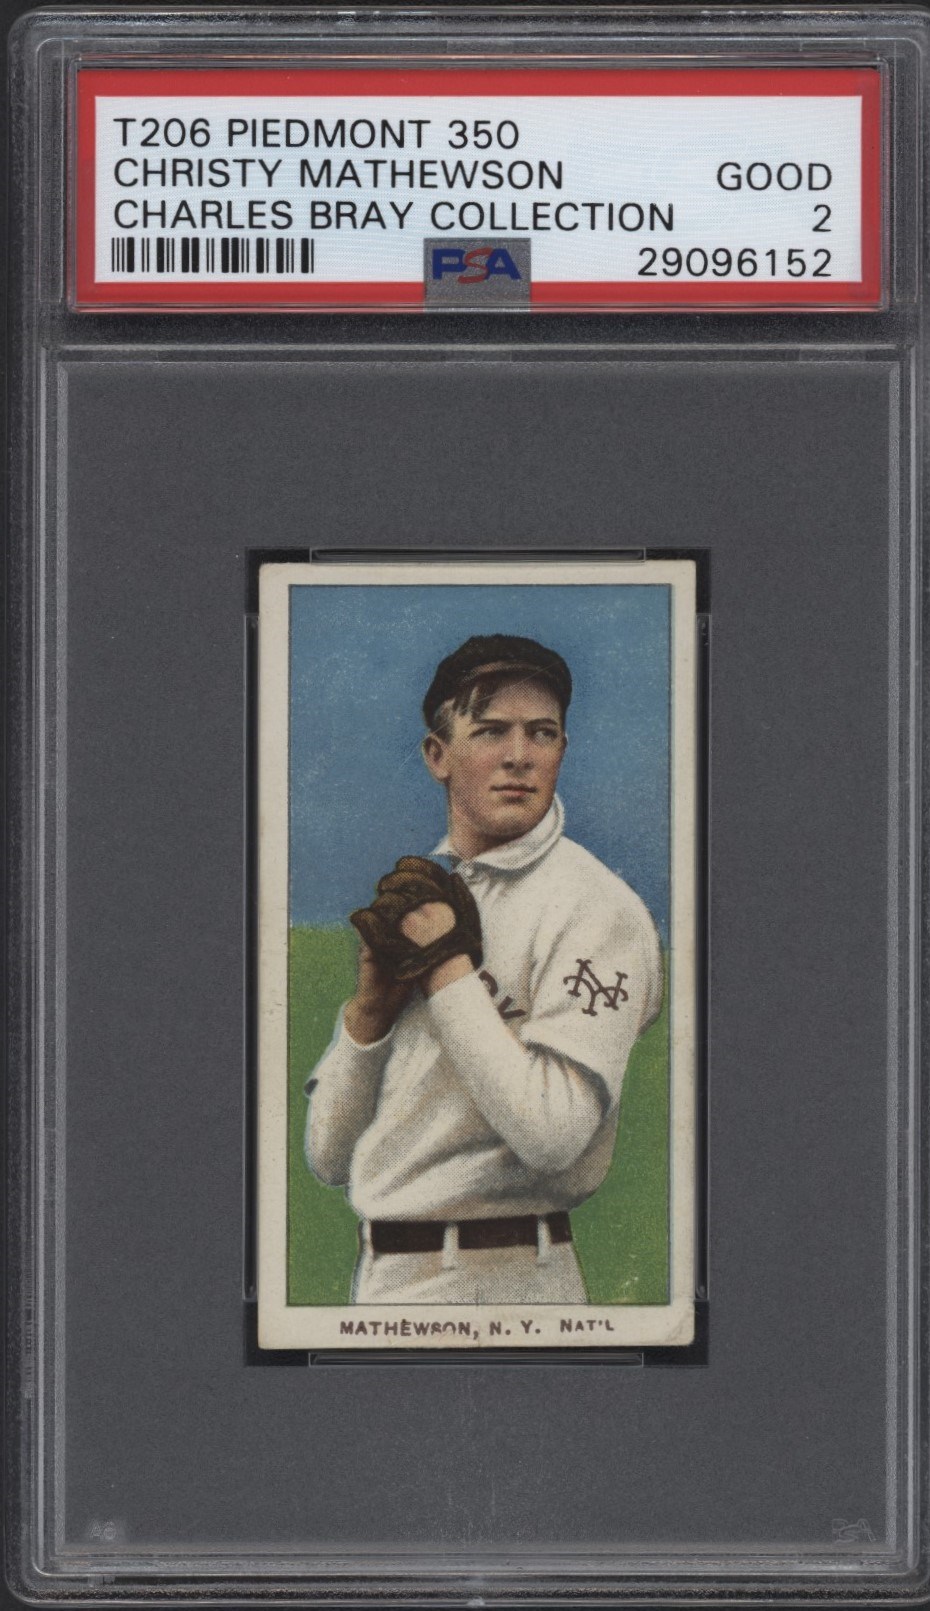 Baseball and Trading Cards - T206 Piedmont 350 Christy Mathewson PSA Good 2 From the Charles Bray Collection